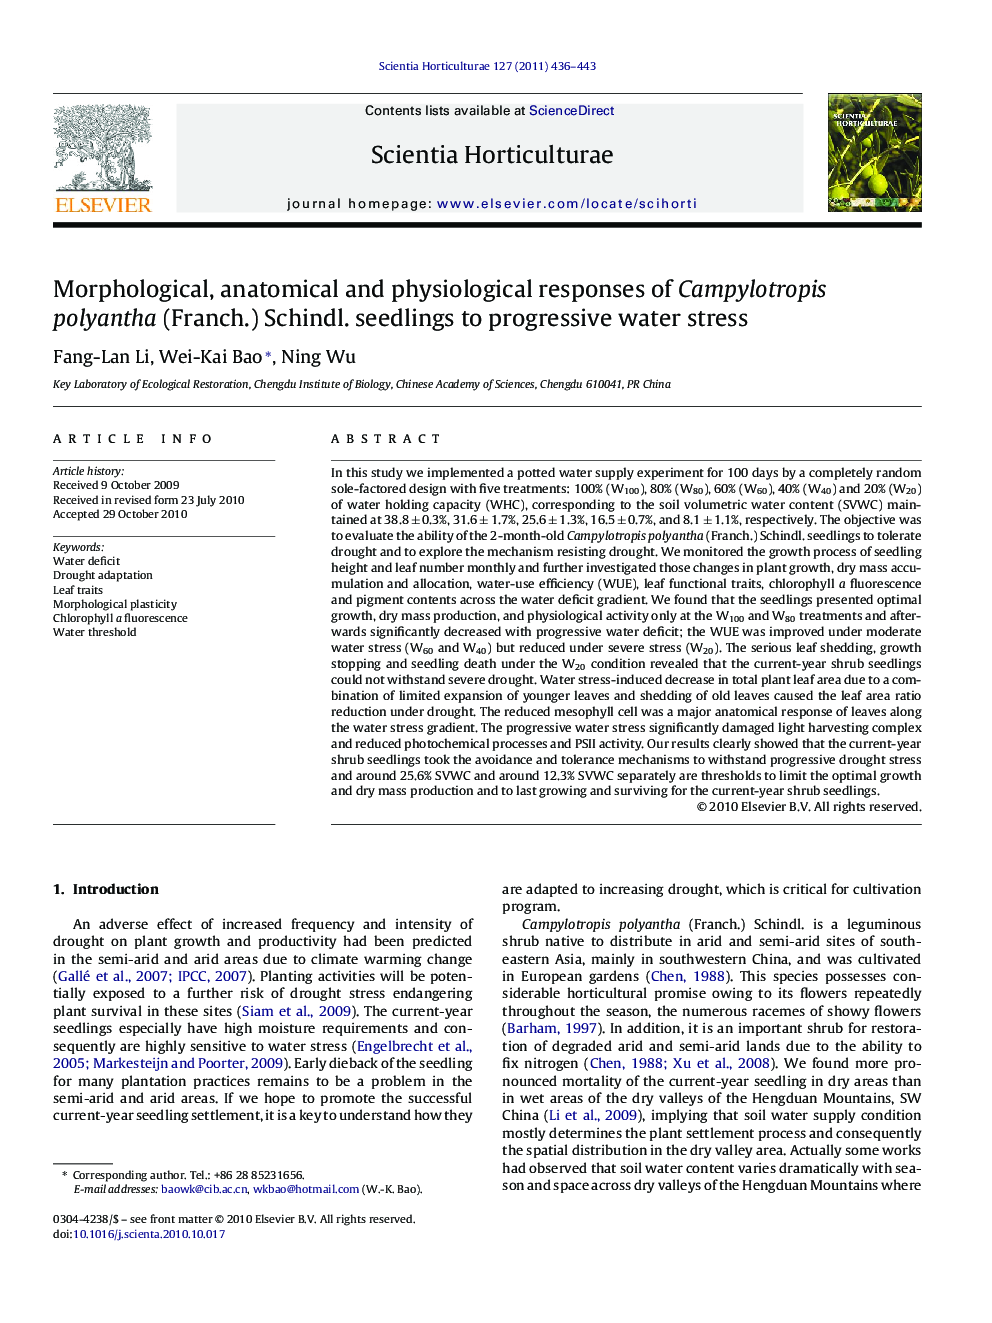 Morphological, anatomical and physiological responses of Campylotropis polyantha (Franch.) Schindl. seedlings to progressive water stress